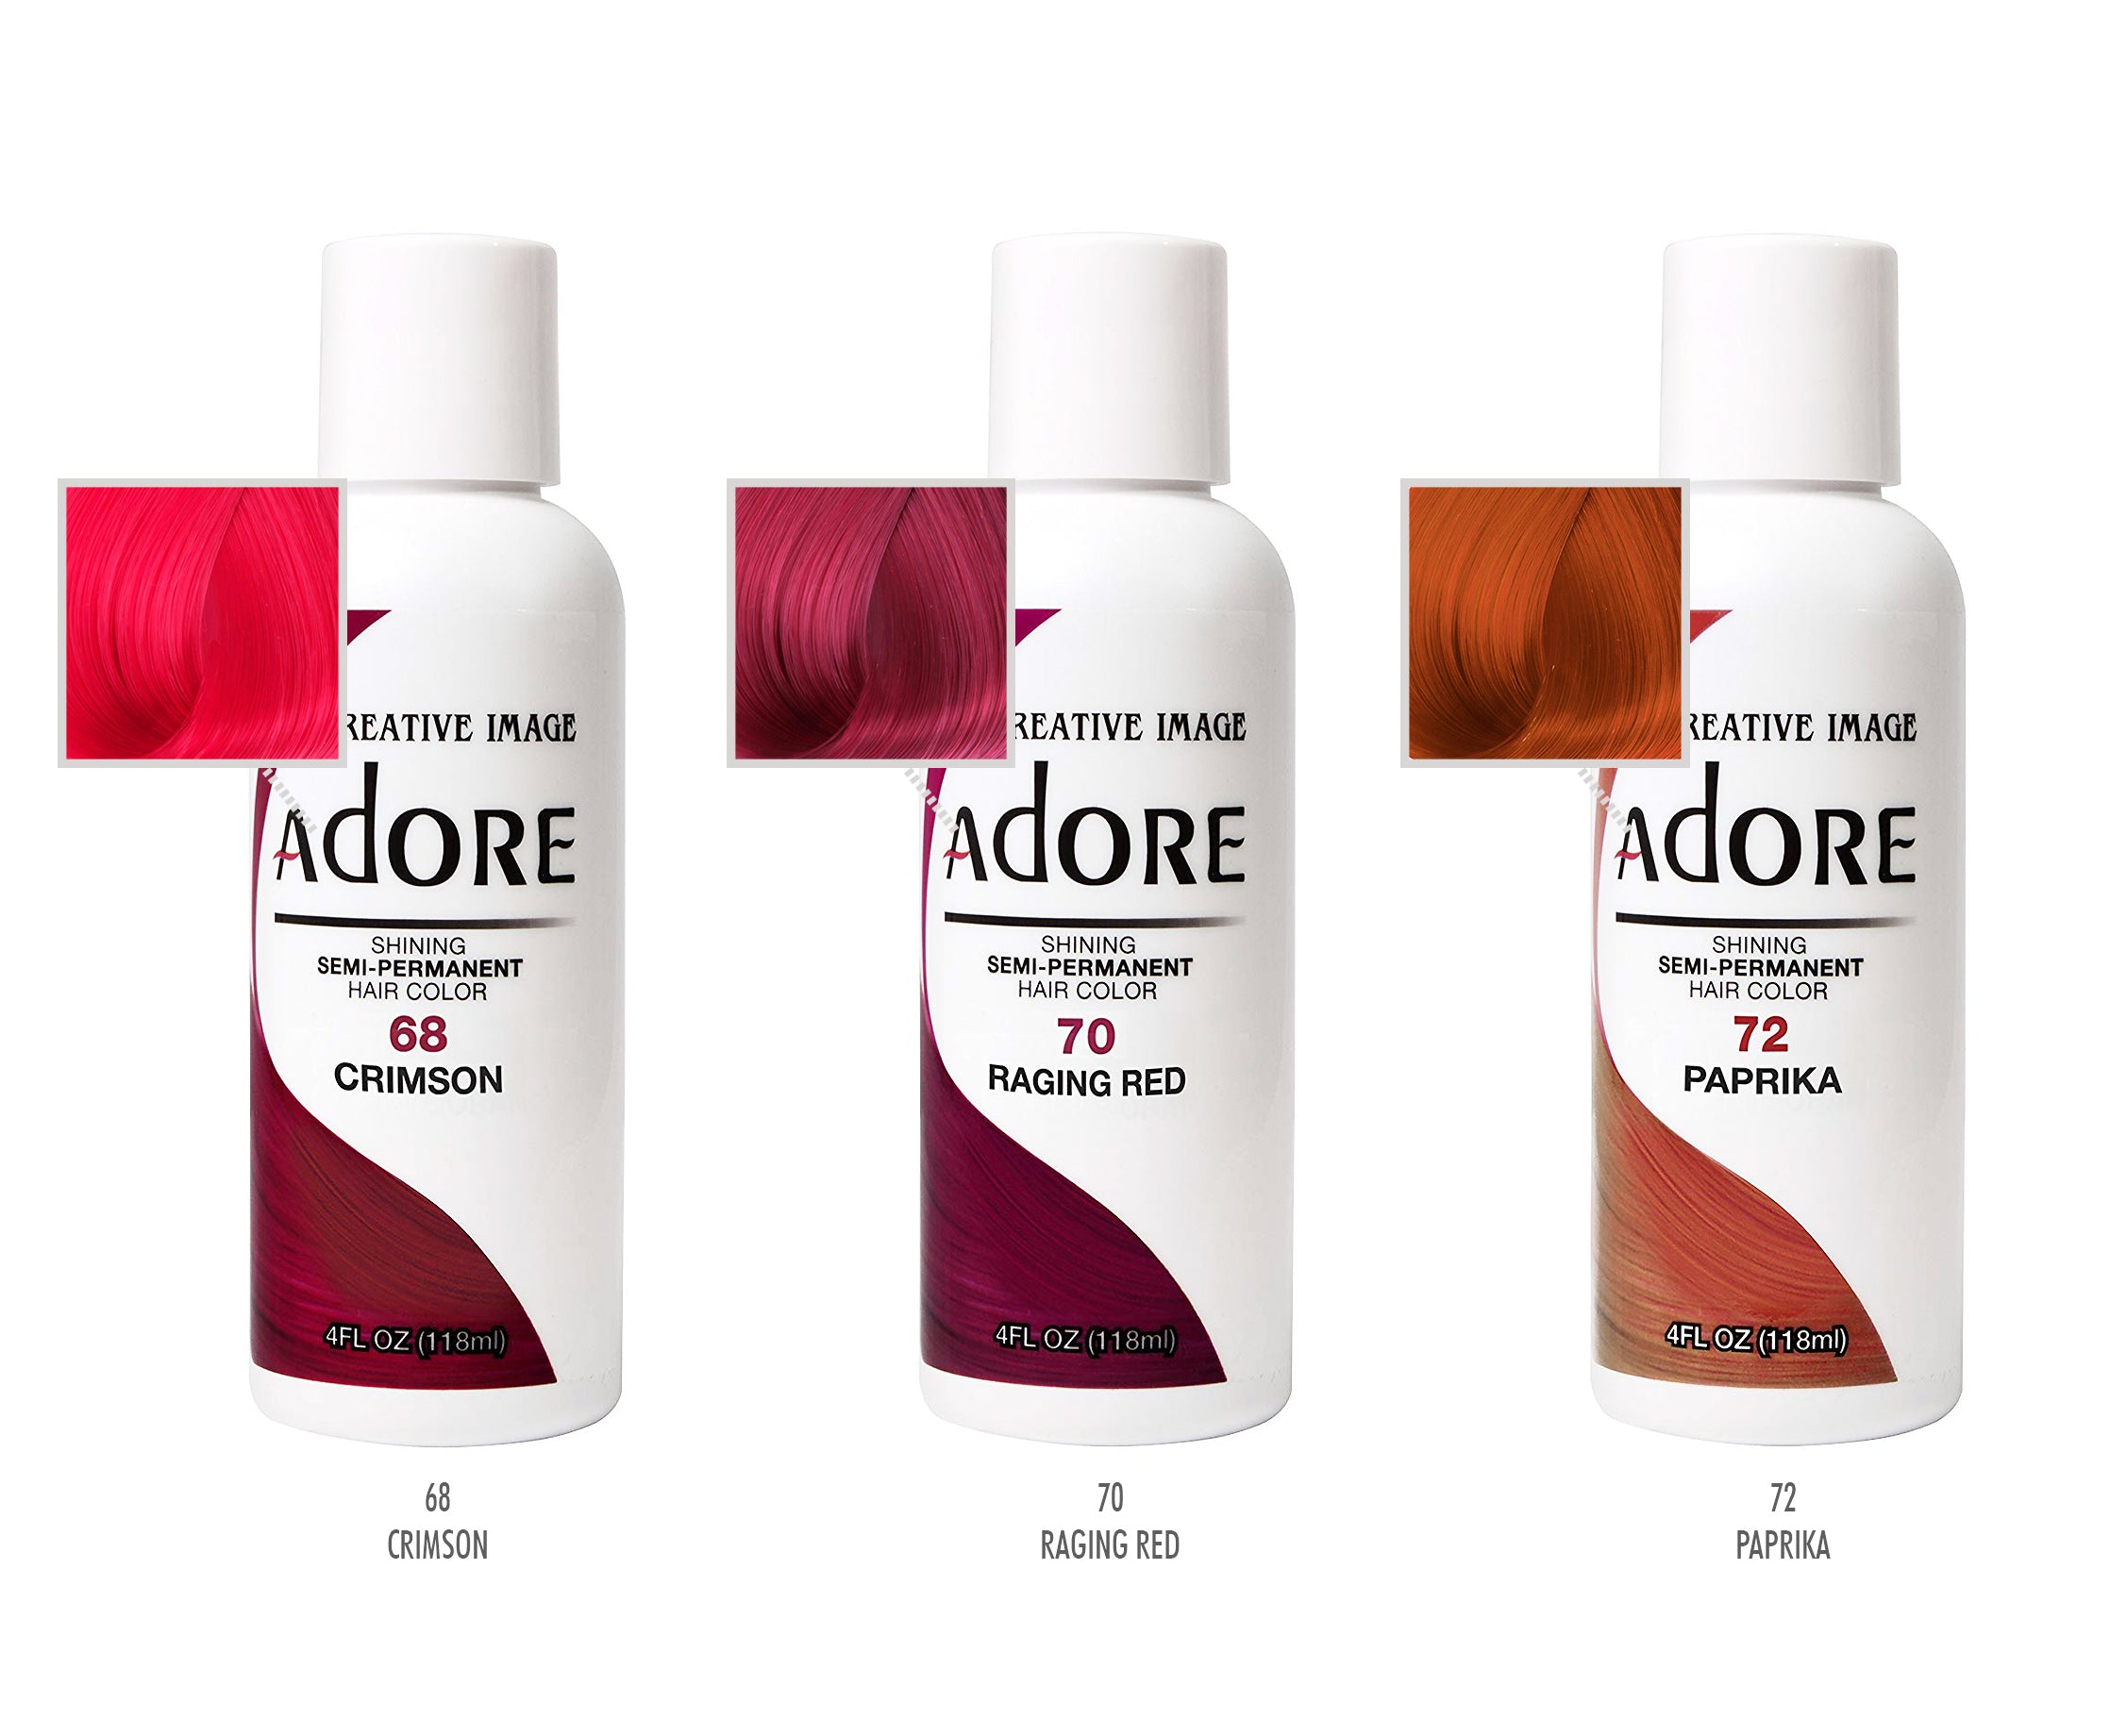 Adore Creative Image Hair Color in Baby Blue - wide 3